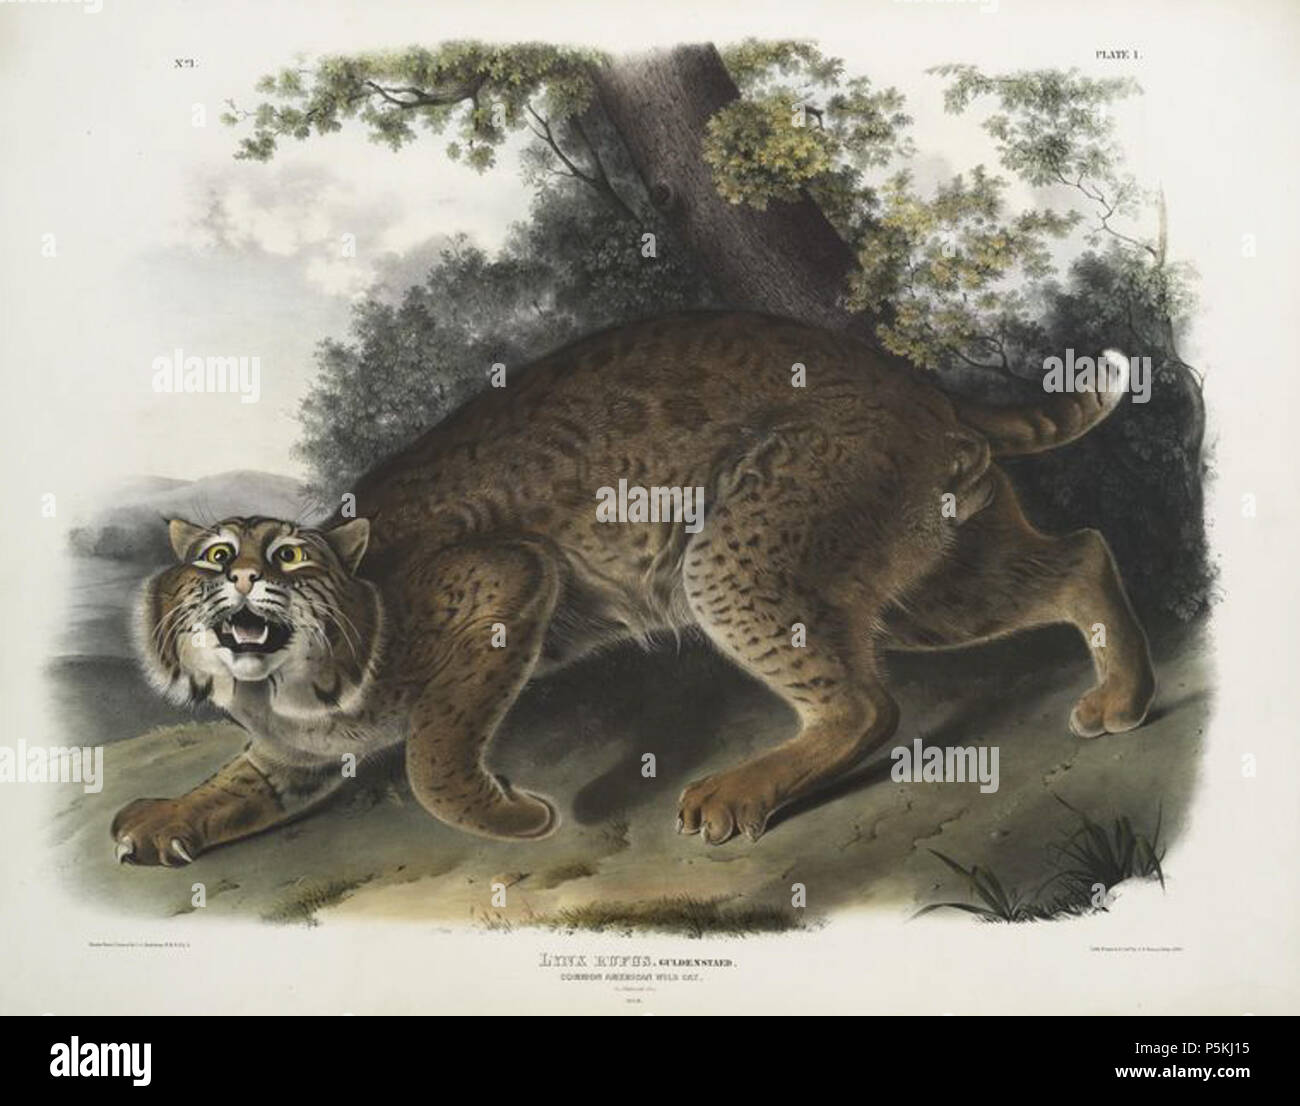 N/A. English: A male Bobcat (Lynx rufus). Plate from The viviparous quadrupeds of North America. Français : Une planche du The viviparous quadrupeds of North America représentant un lynx roux mâle. between 1845 and 1848.   John James Audubon  (1785–1851)       Alternative names Birth name: Jean-Jacques-Fougère Audubon  Description American ornithologist, naturalist, hunter and painter  Date of birth/death 26 April 1785 27 January 1851  Location of birth/death Les Cayes (Haiti) New York City  Work location Louisville, New Orleans, New York City, Florida  Authority control  : Q182882 VIAF:147656 Stock Photo